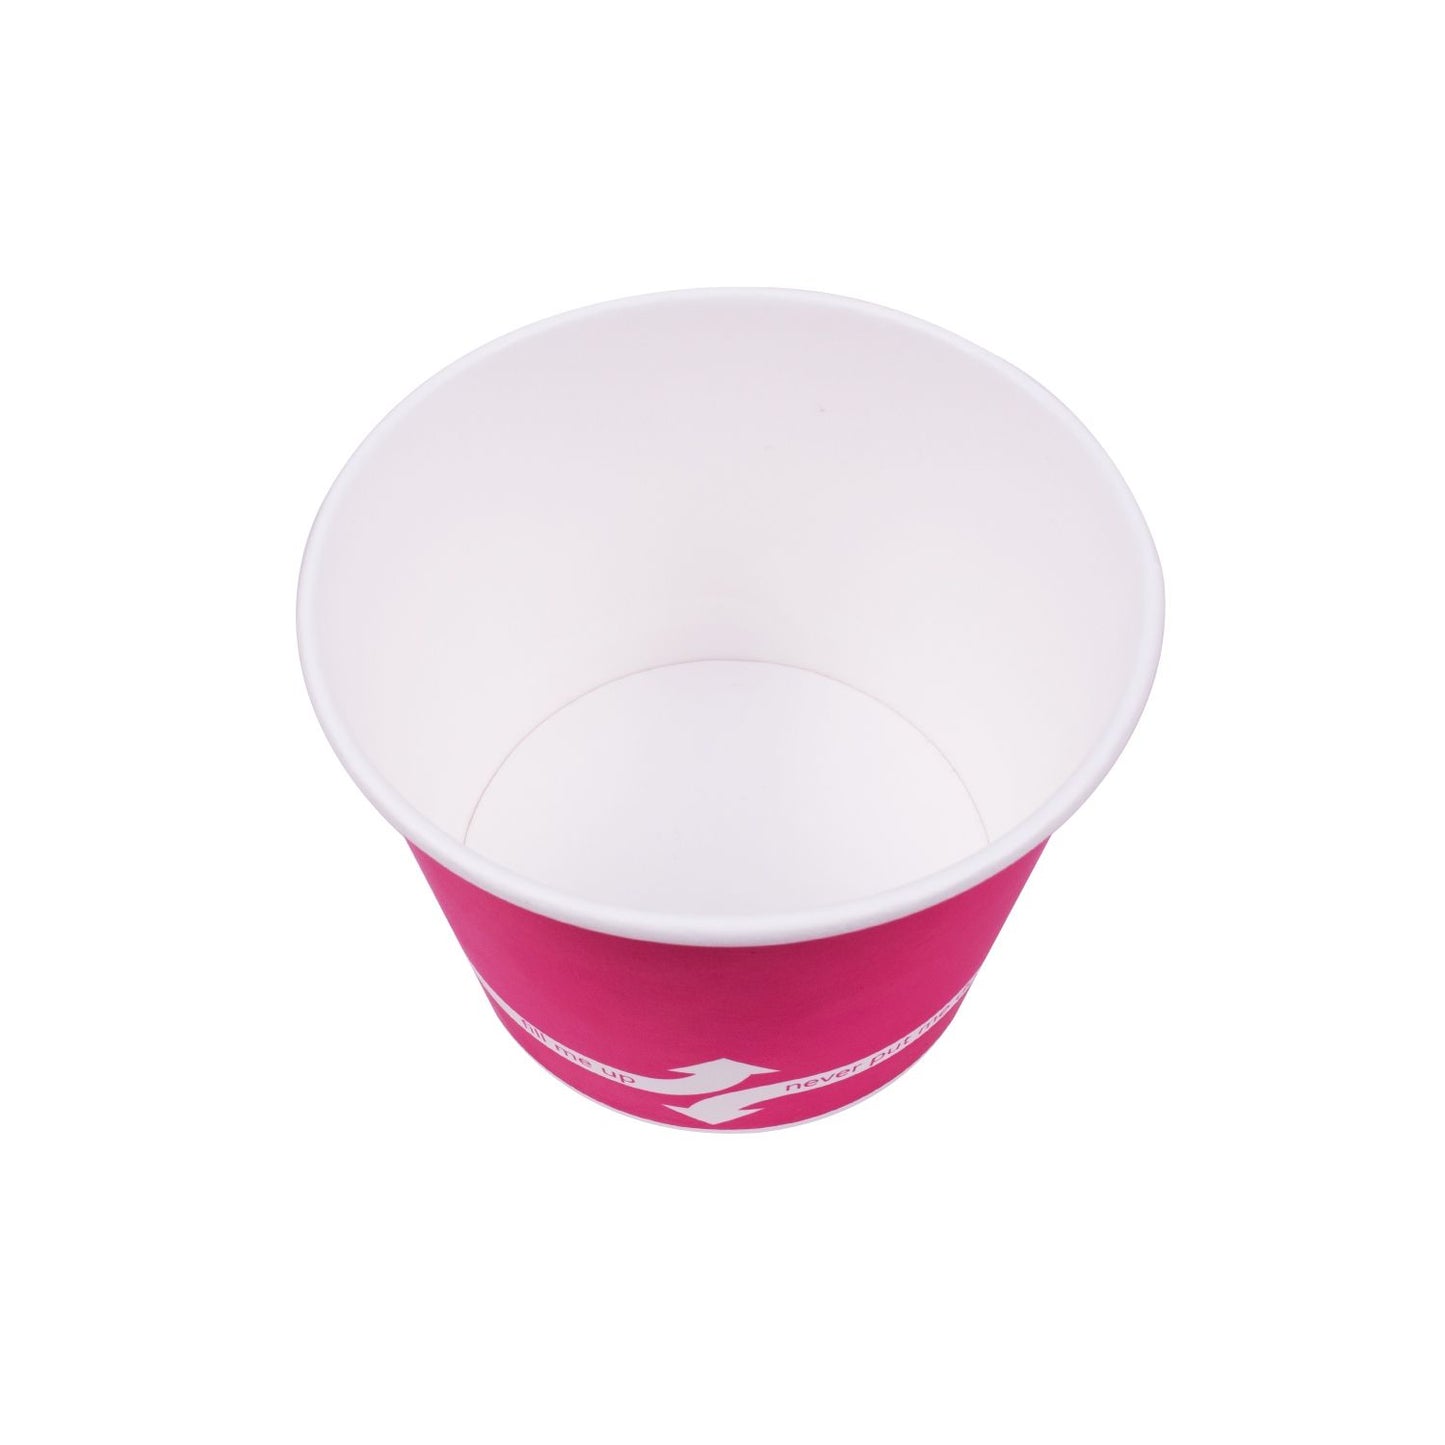 Karat 16oz Paper Food Containers - Pink (112mm) - 1,000 ct